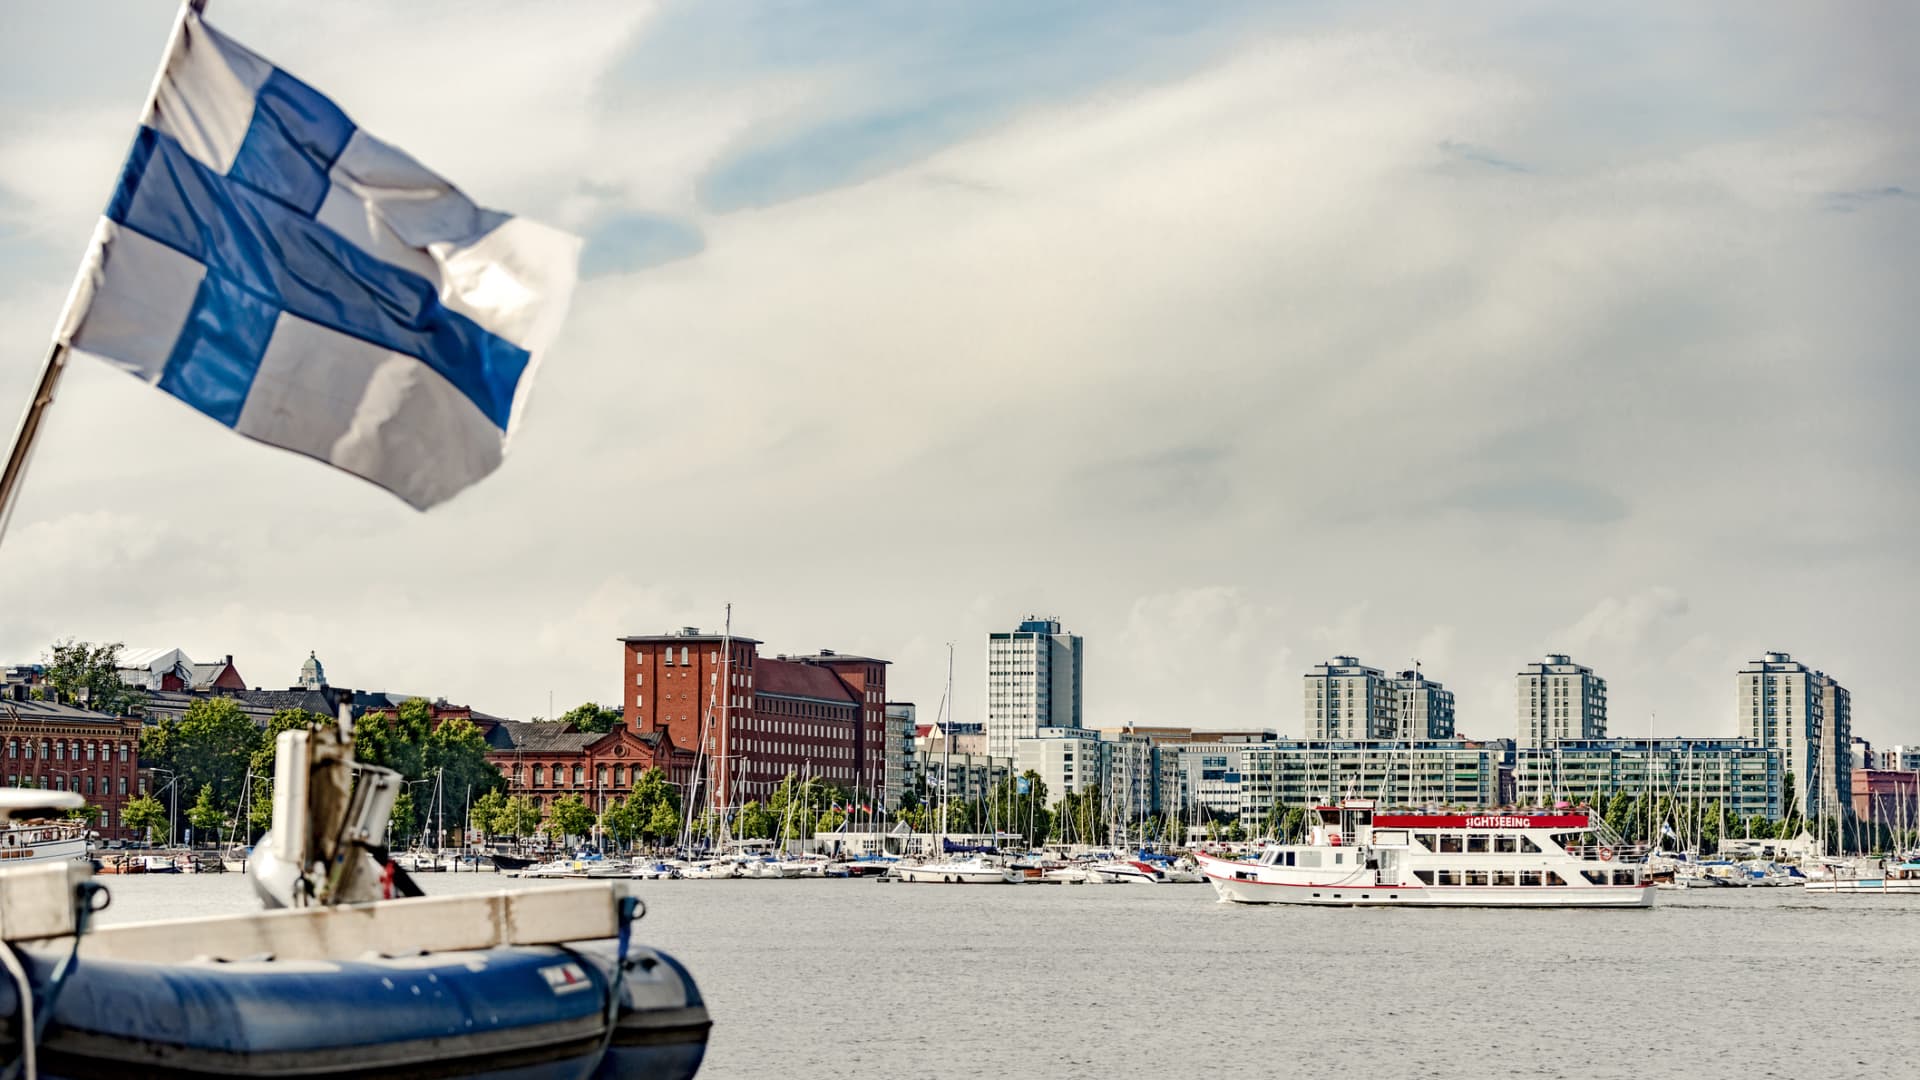 The lucky participants of the masterclass will be staying in Finland's capital, Helsinki.